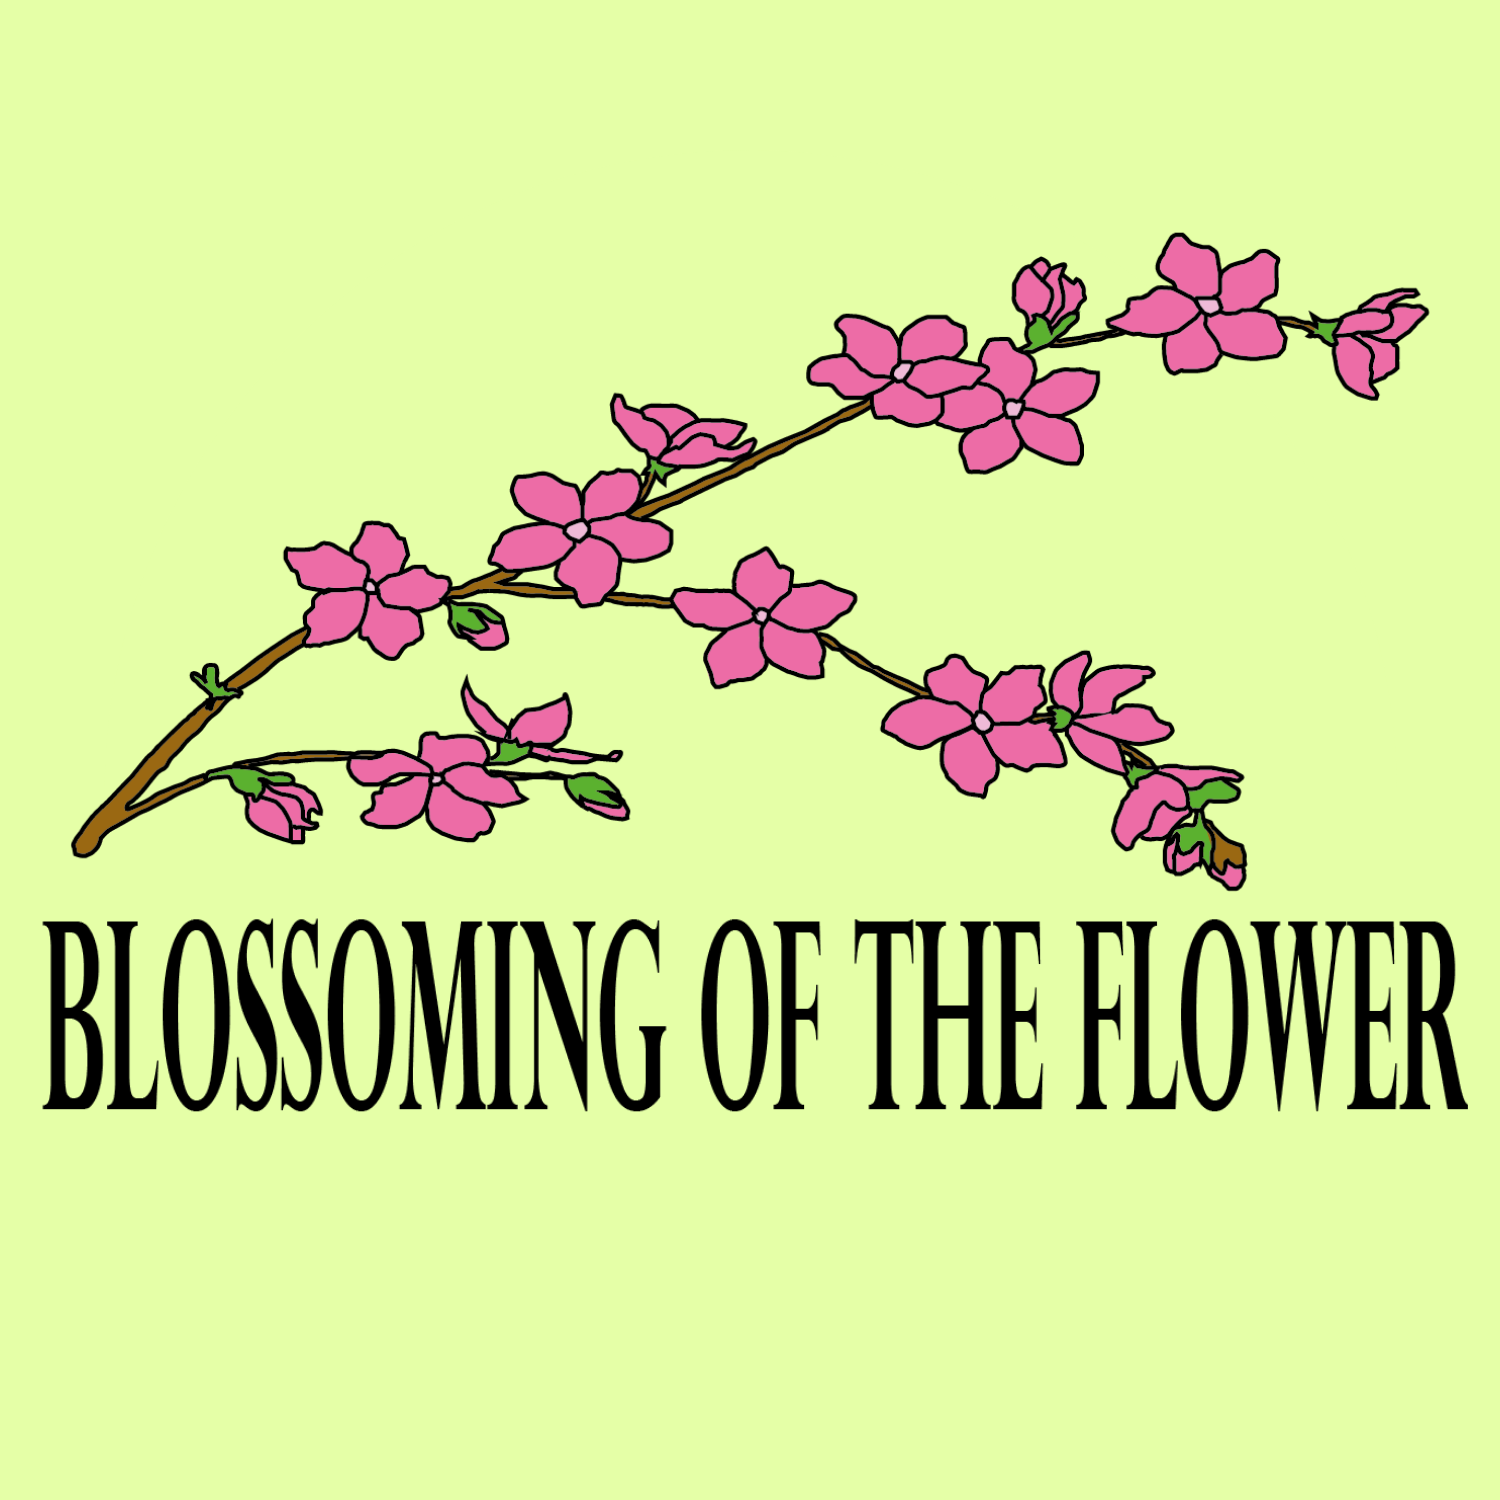 Blossoming of the Flower